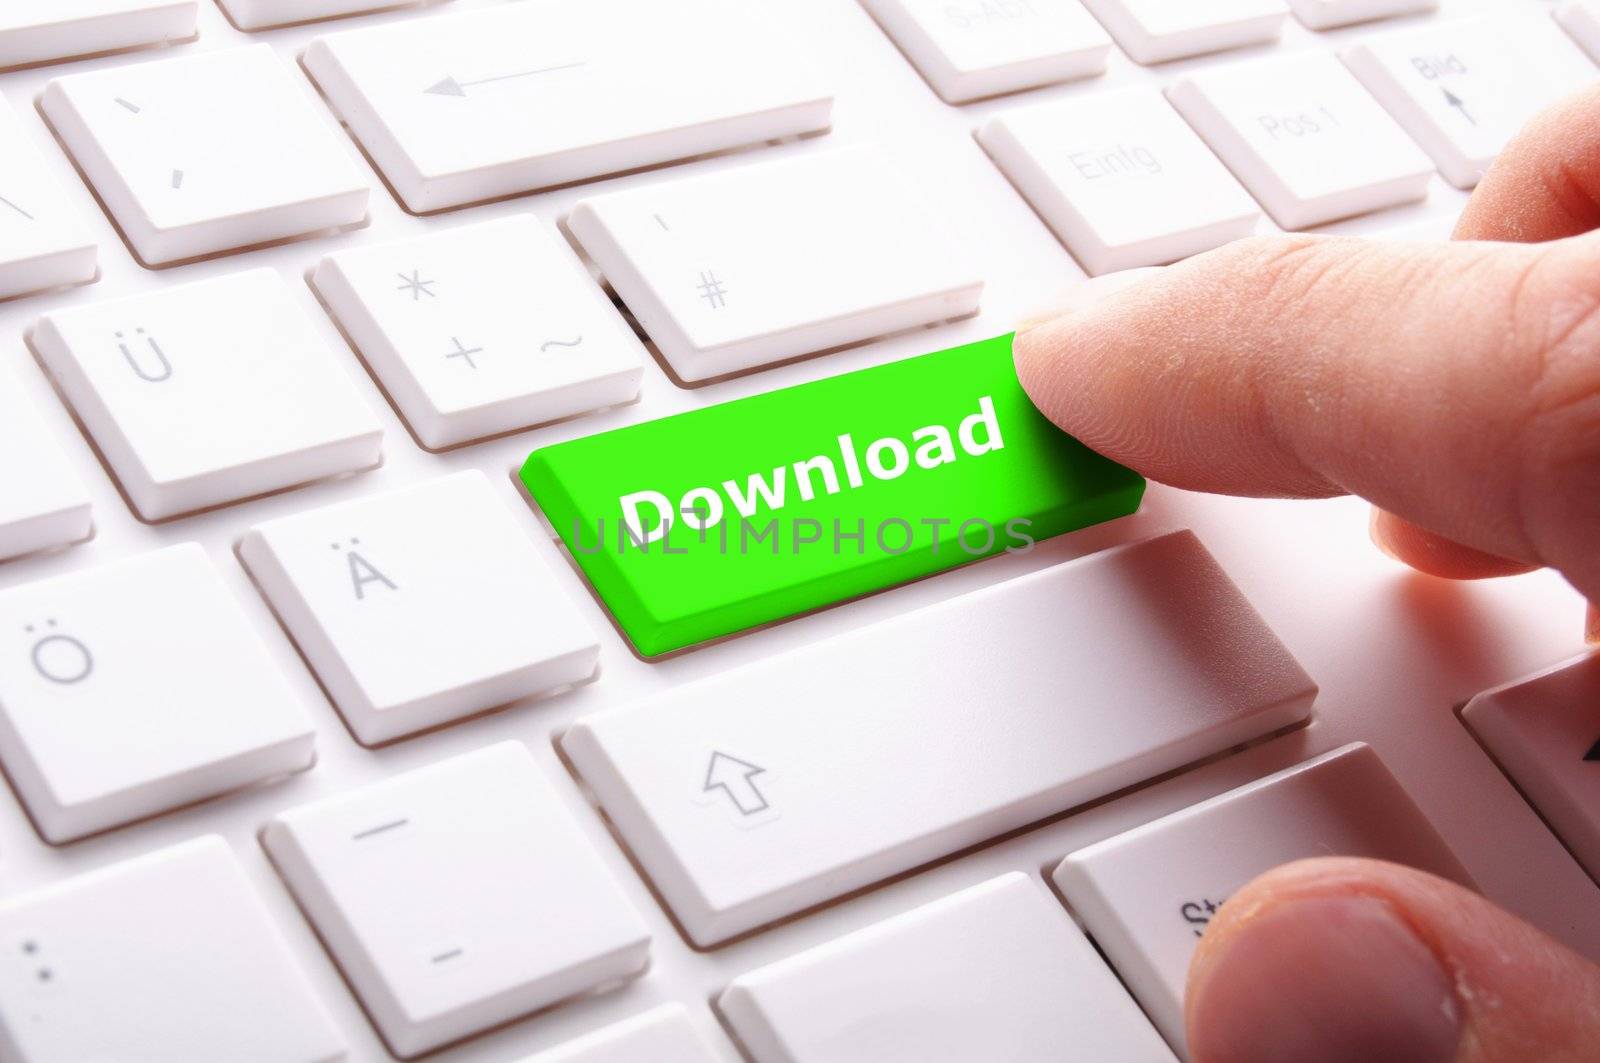 download key or button showing internet file or data sharing